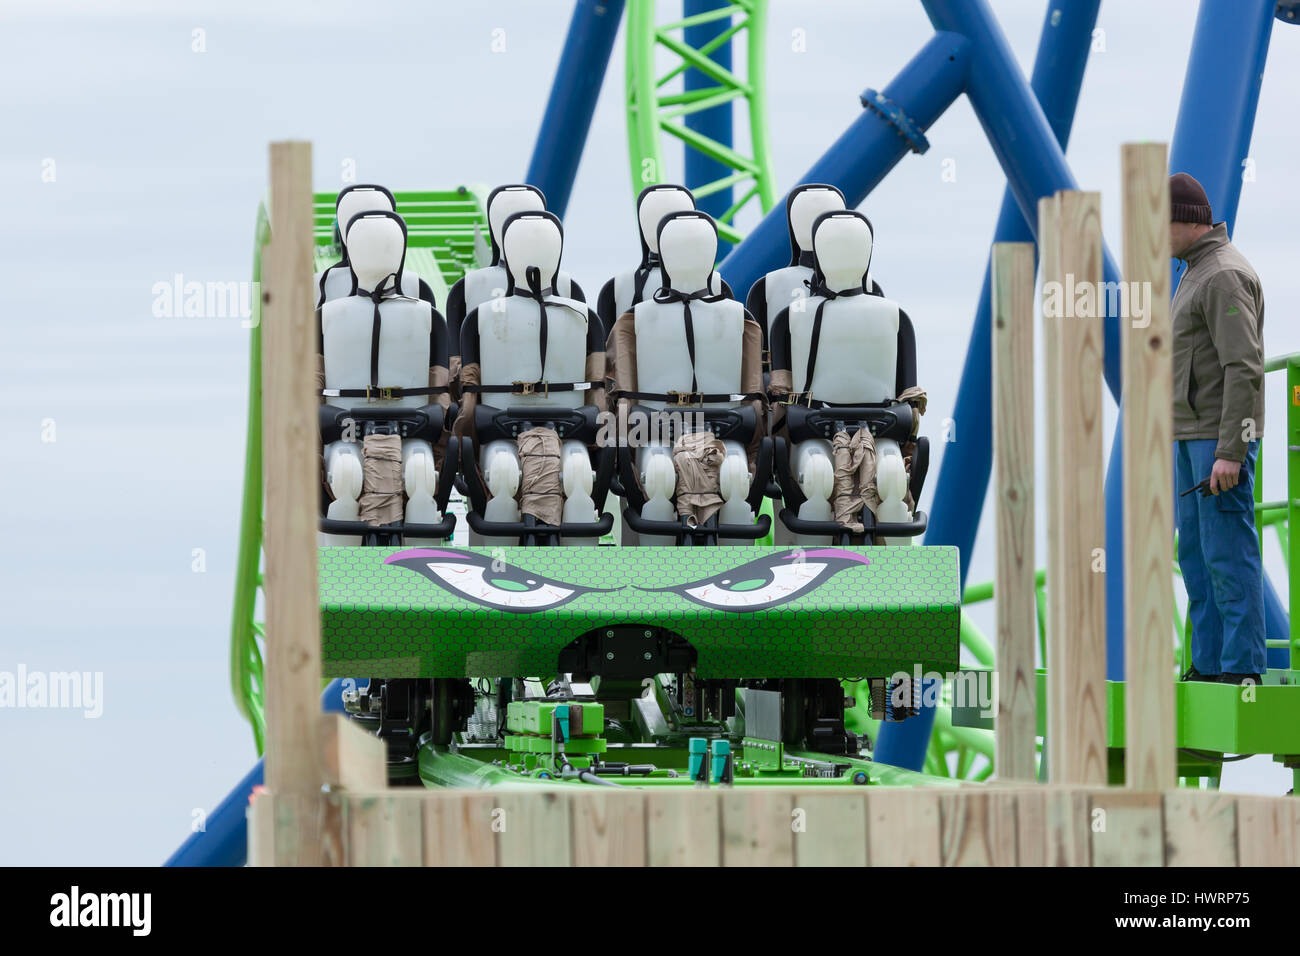 SEASIDE HEIGHTS, NEW JERSEY - March 21, 2017: Crash test dummies are used  to test the new Hydrus roller coaster at Casino Pier Stock Photo - Alamy